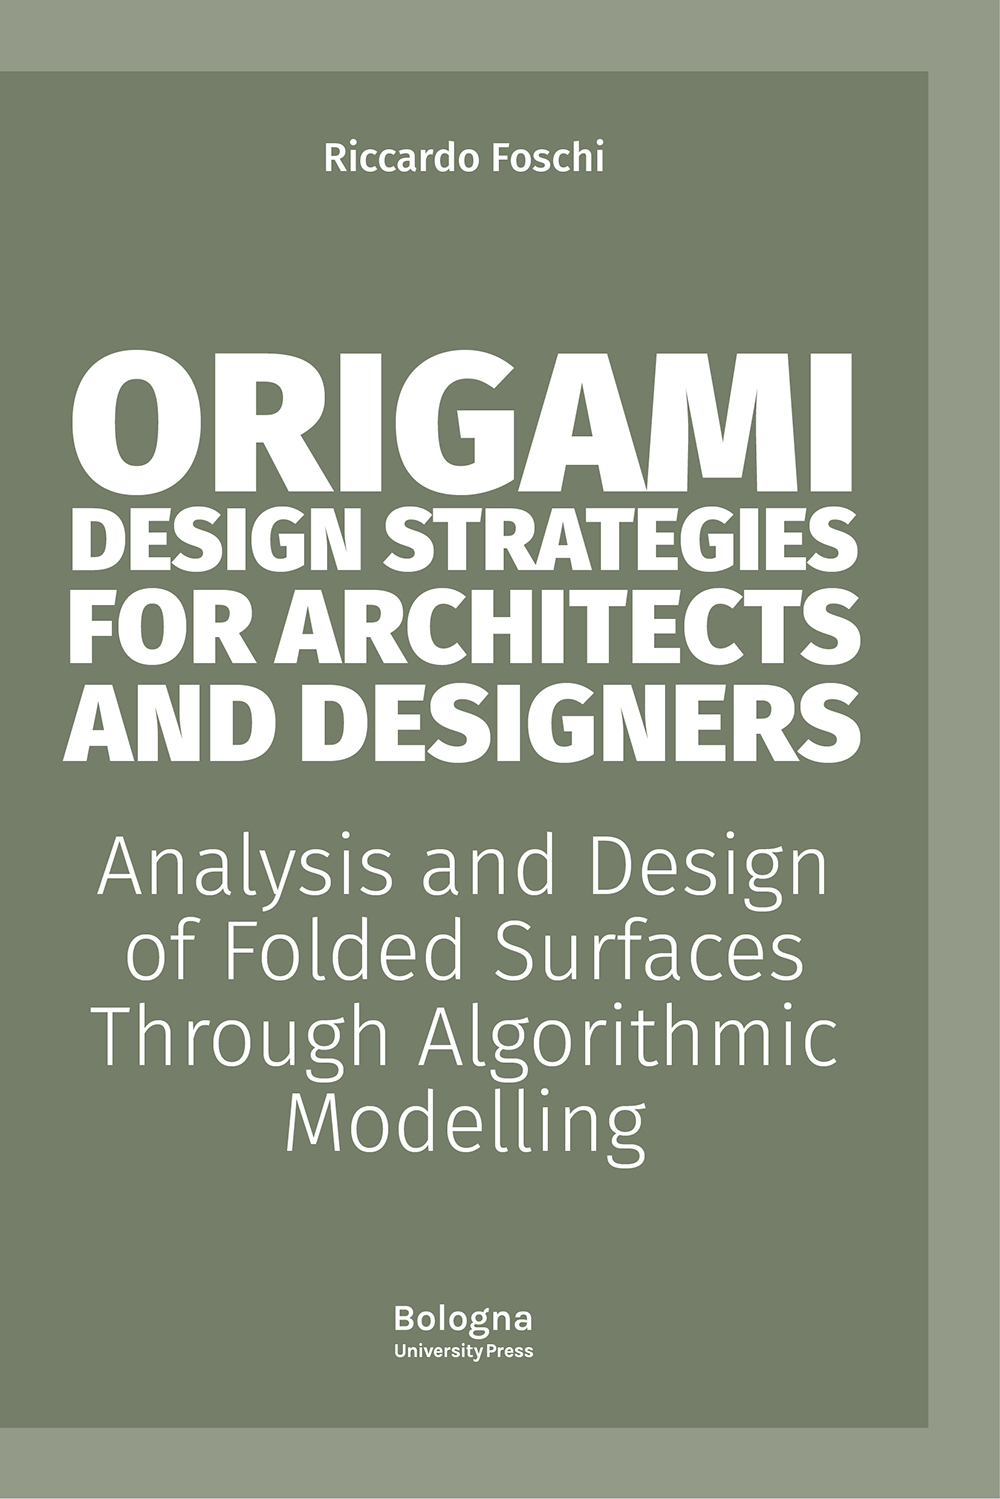 Origami Design Strategies for Architects and Designers - Bologna University Press